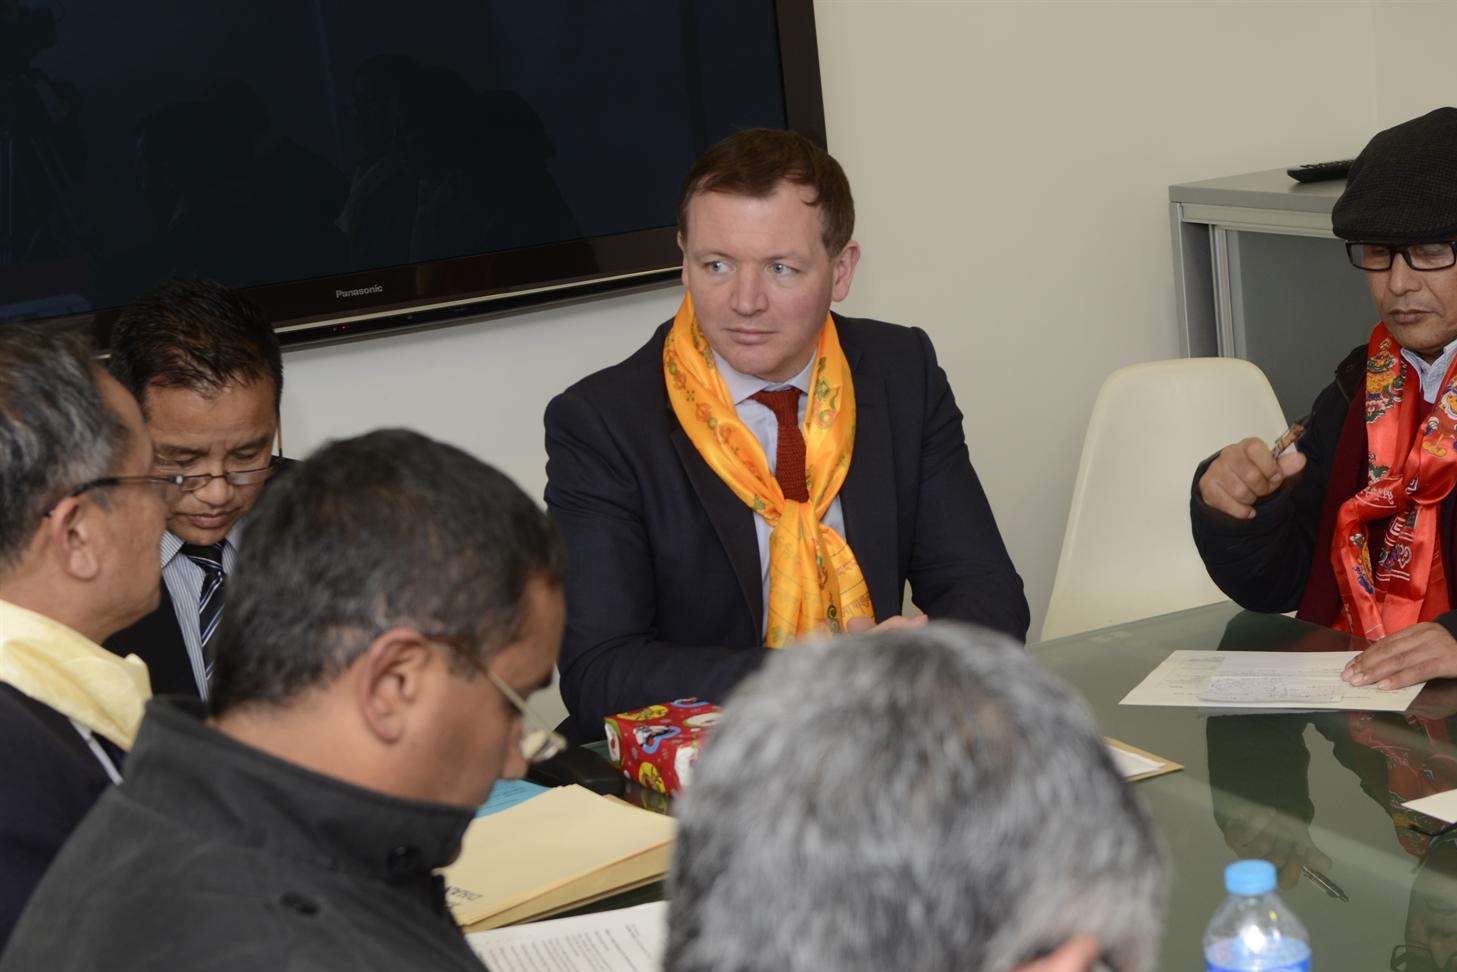 MP Damian Collins met with members of the National Gurkha Community at The Workshop in Folkestone in January